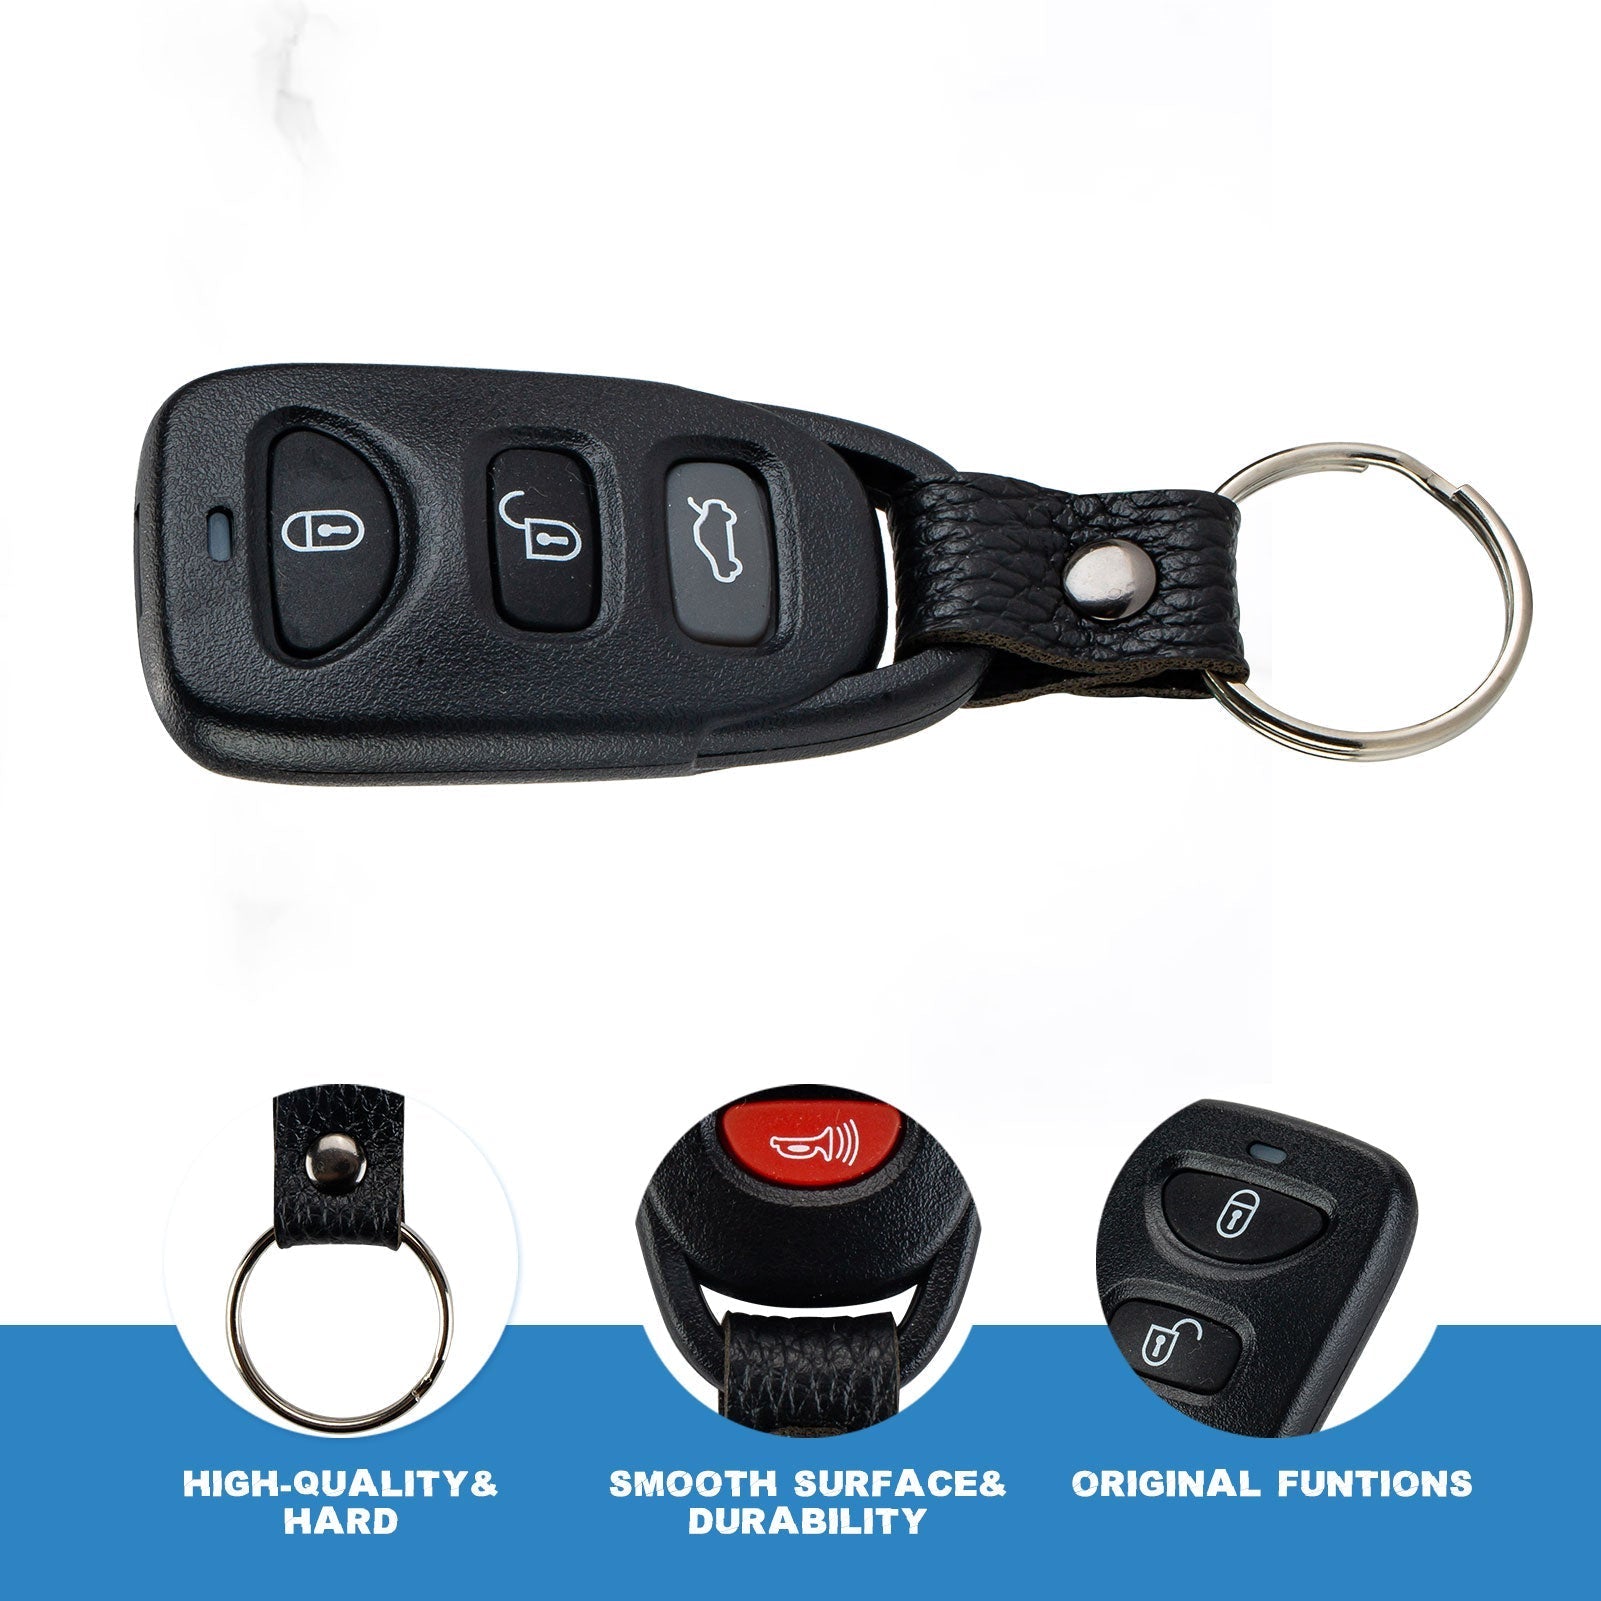 Replacement for Keyless Entry Remote Car Key Fob fit for 2010 - 2014 Kia Forte 4 BTN PINHA-T008   KR-K4RD